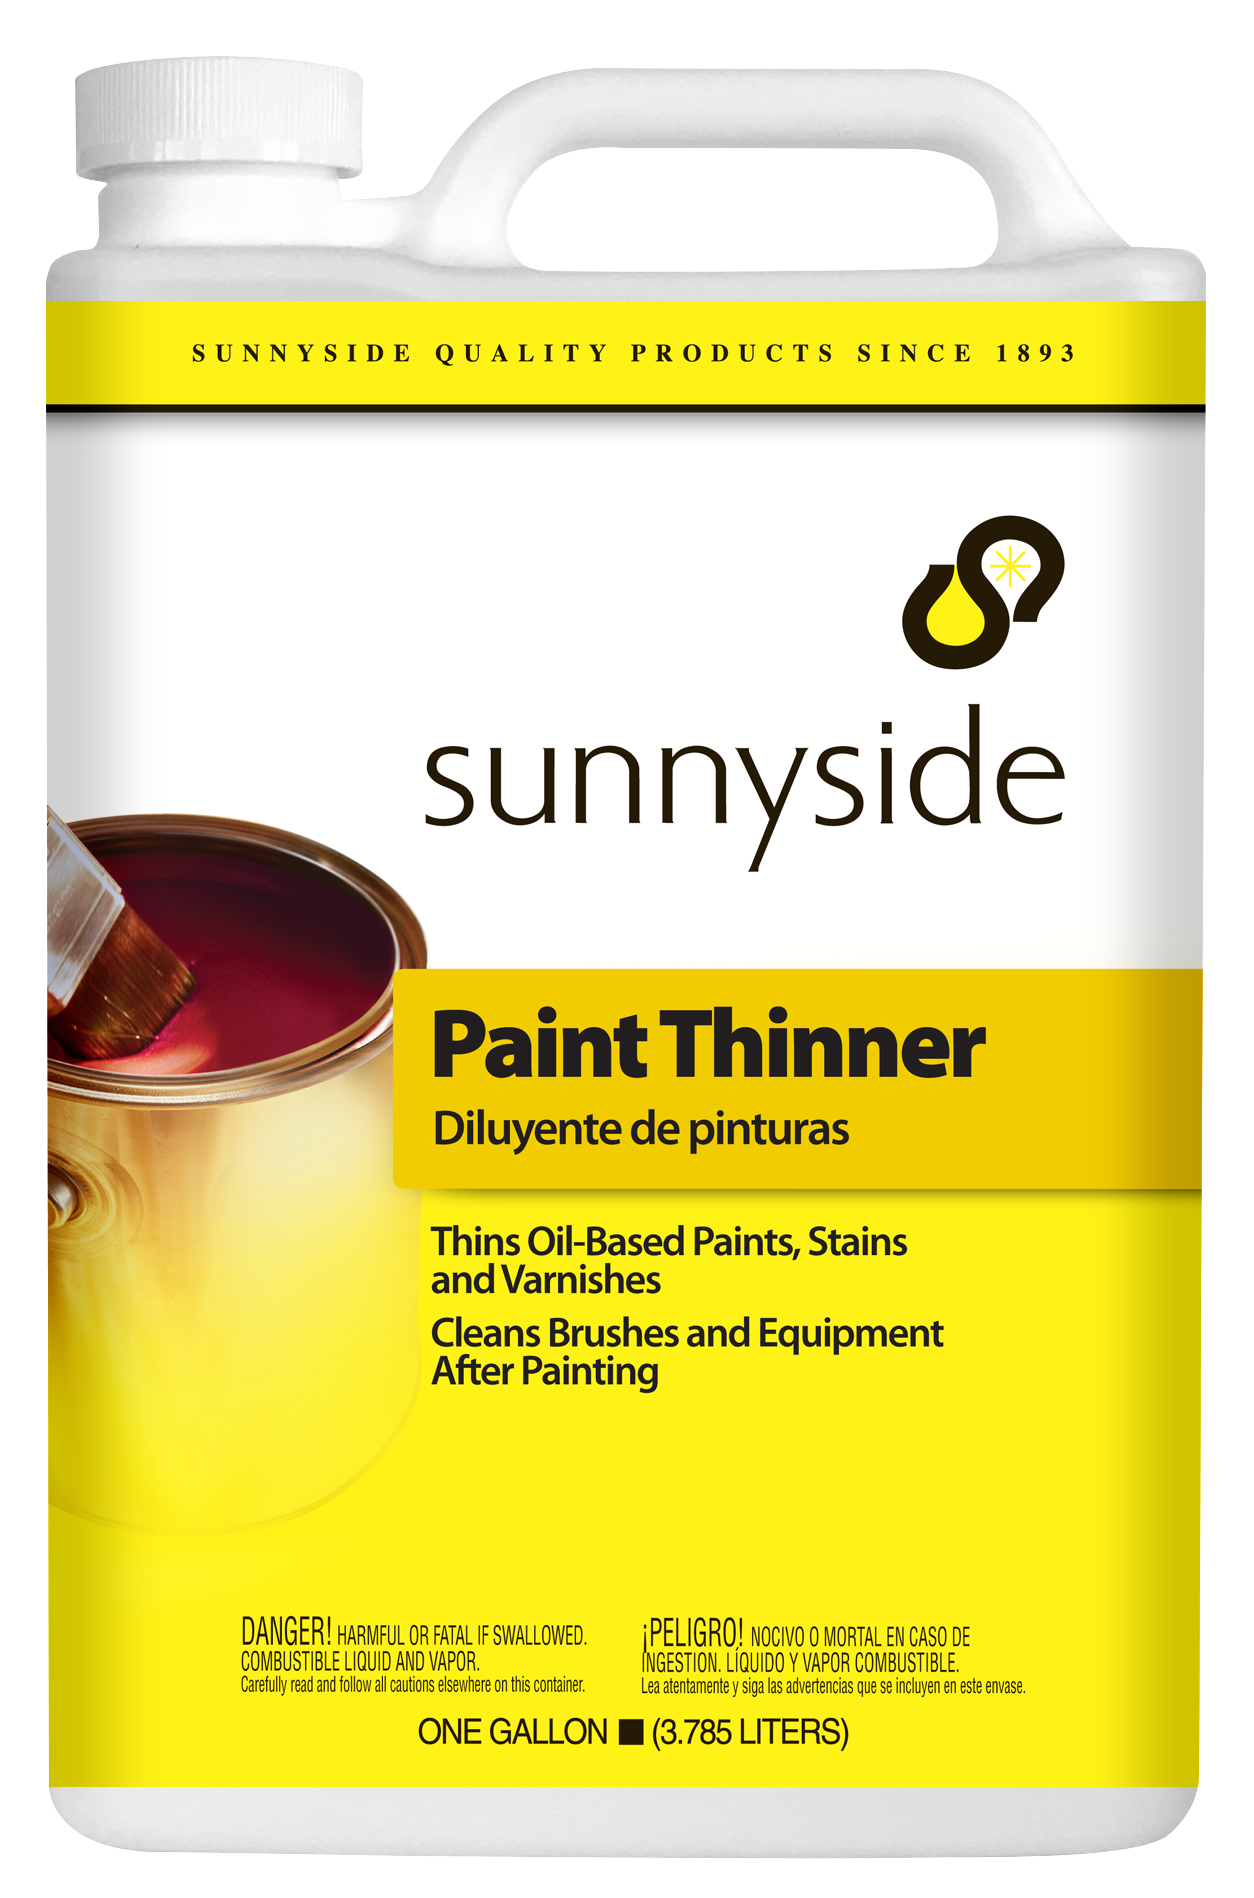 PAINT THINNER Product Image